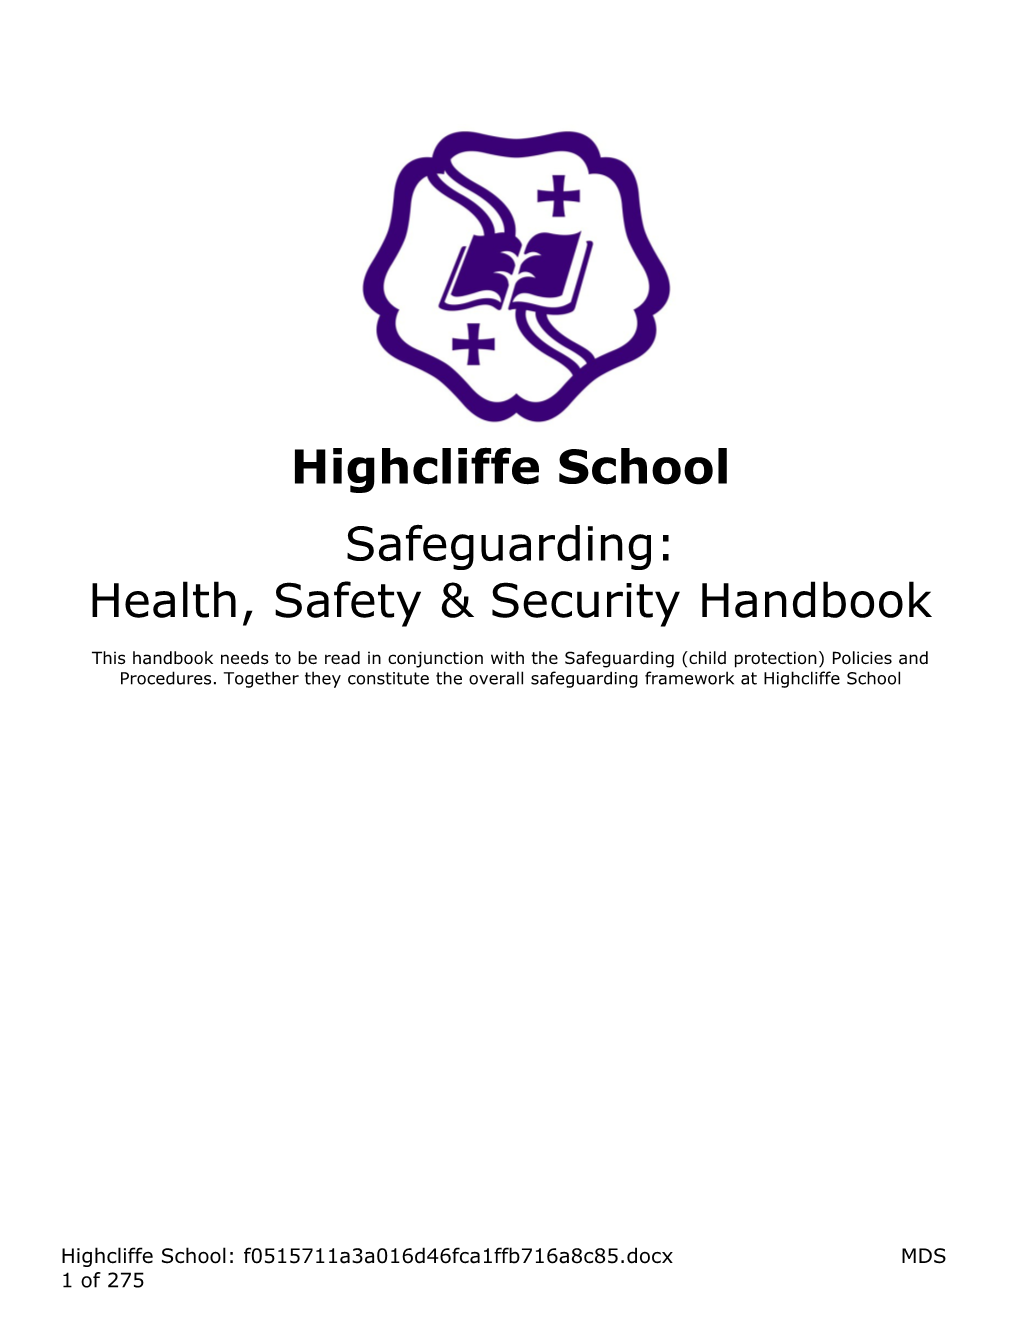 Health, Safety and Security at Highcliffe School